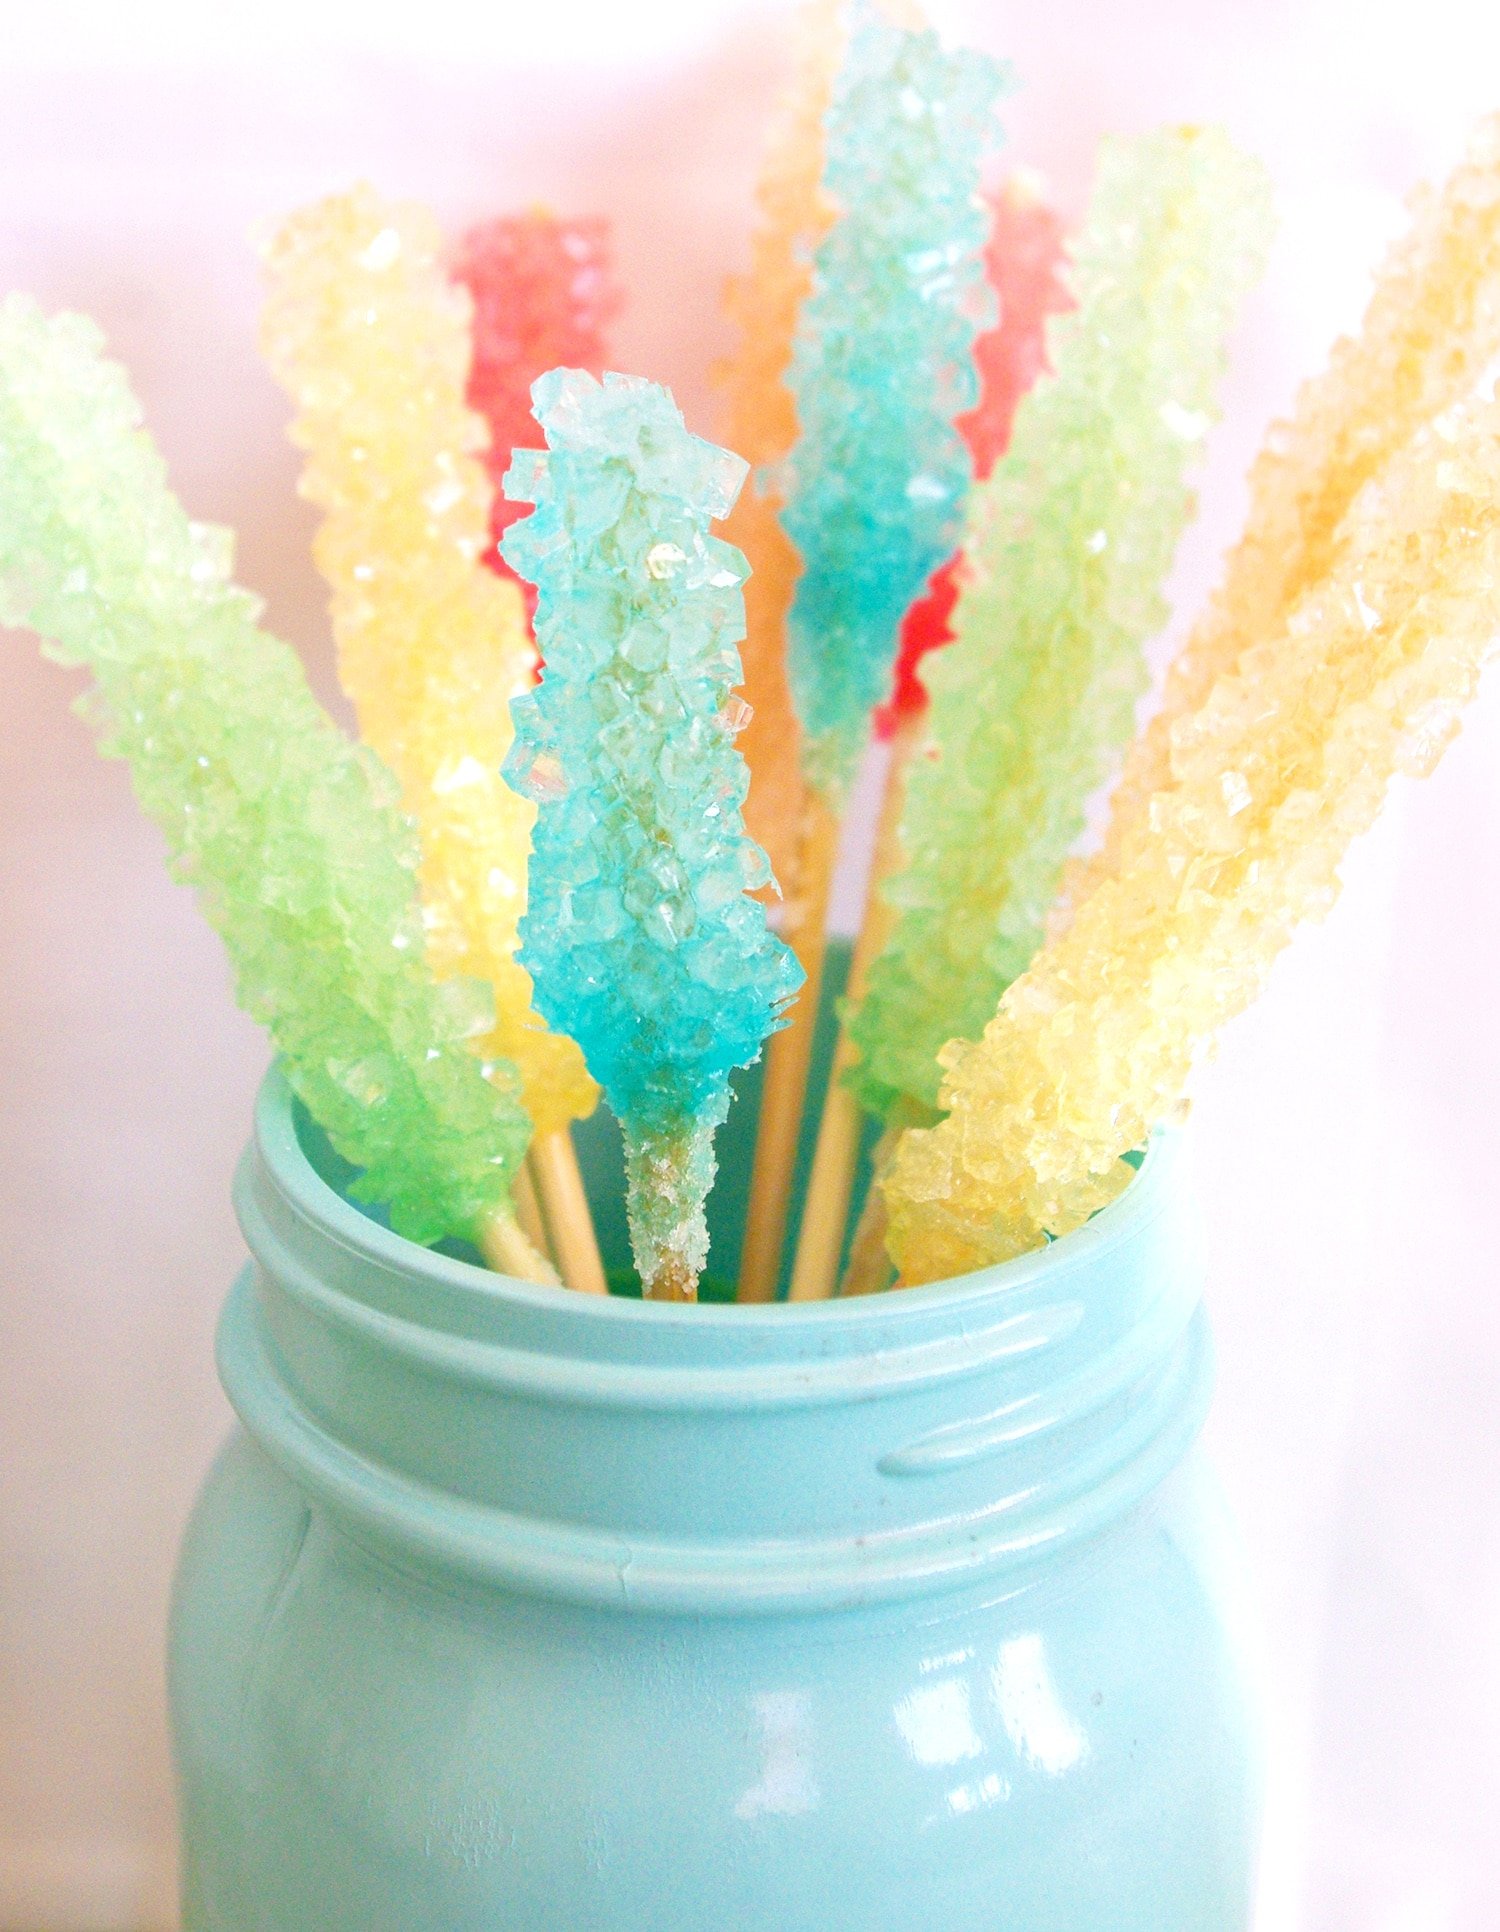 Simple Glass Jar Crafts for Summer (Too Cute!) - DIY Candy